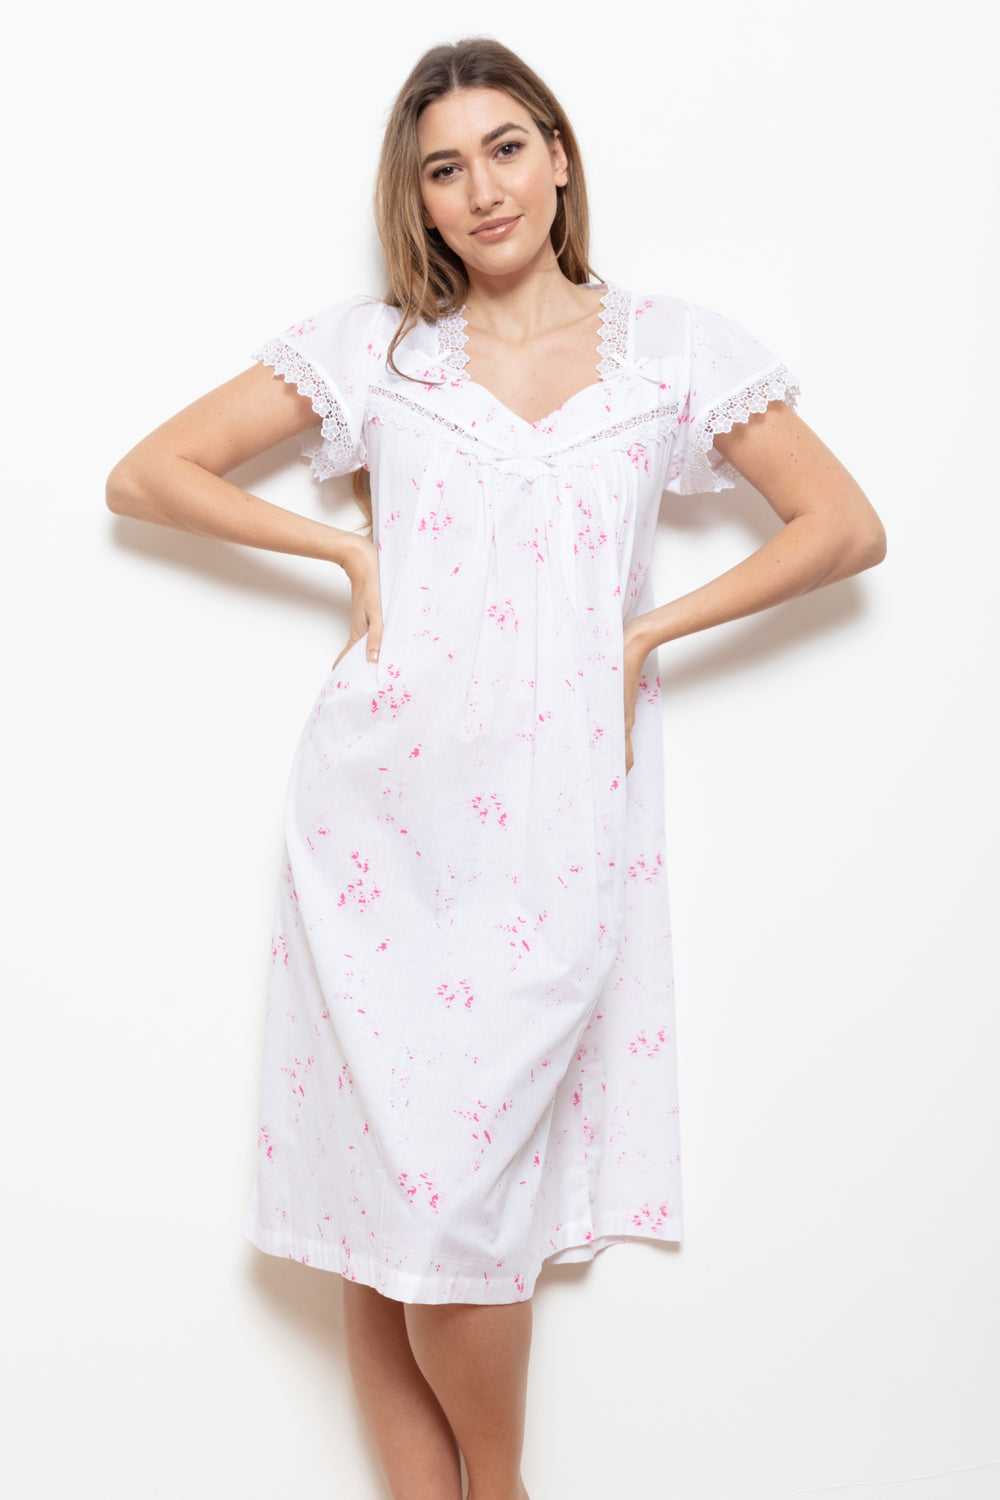 Cottonreal 'Yana' Pretty Pink Floral & White 100% Cotton Cap Sleeve Nightdress